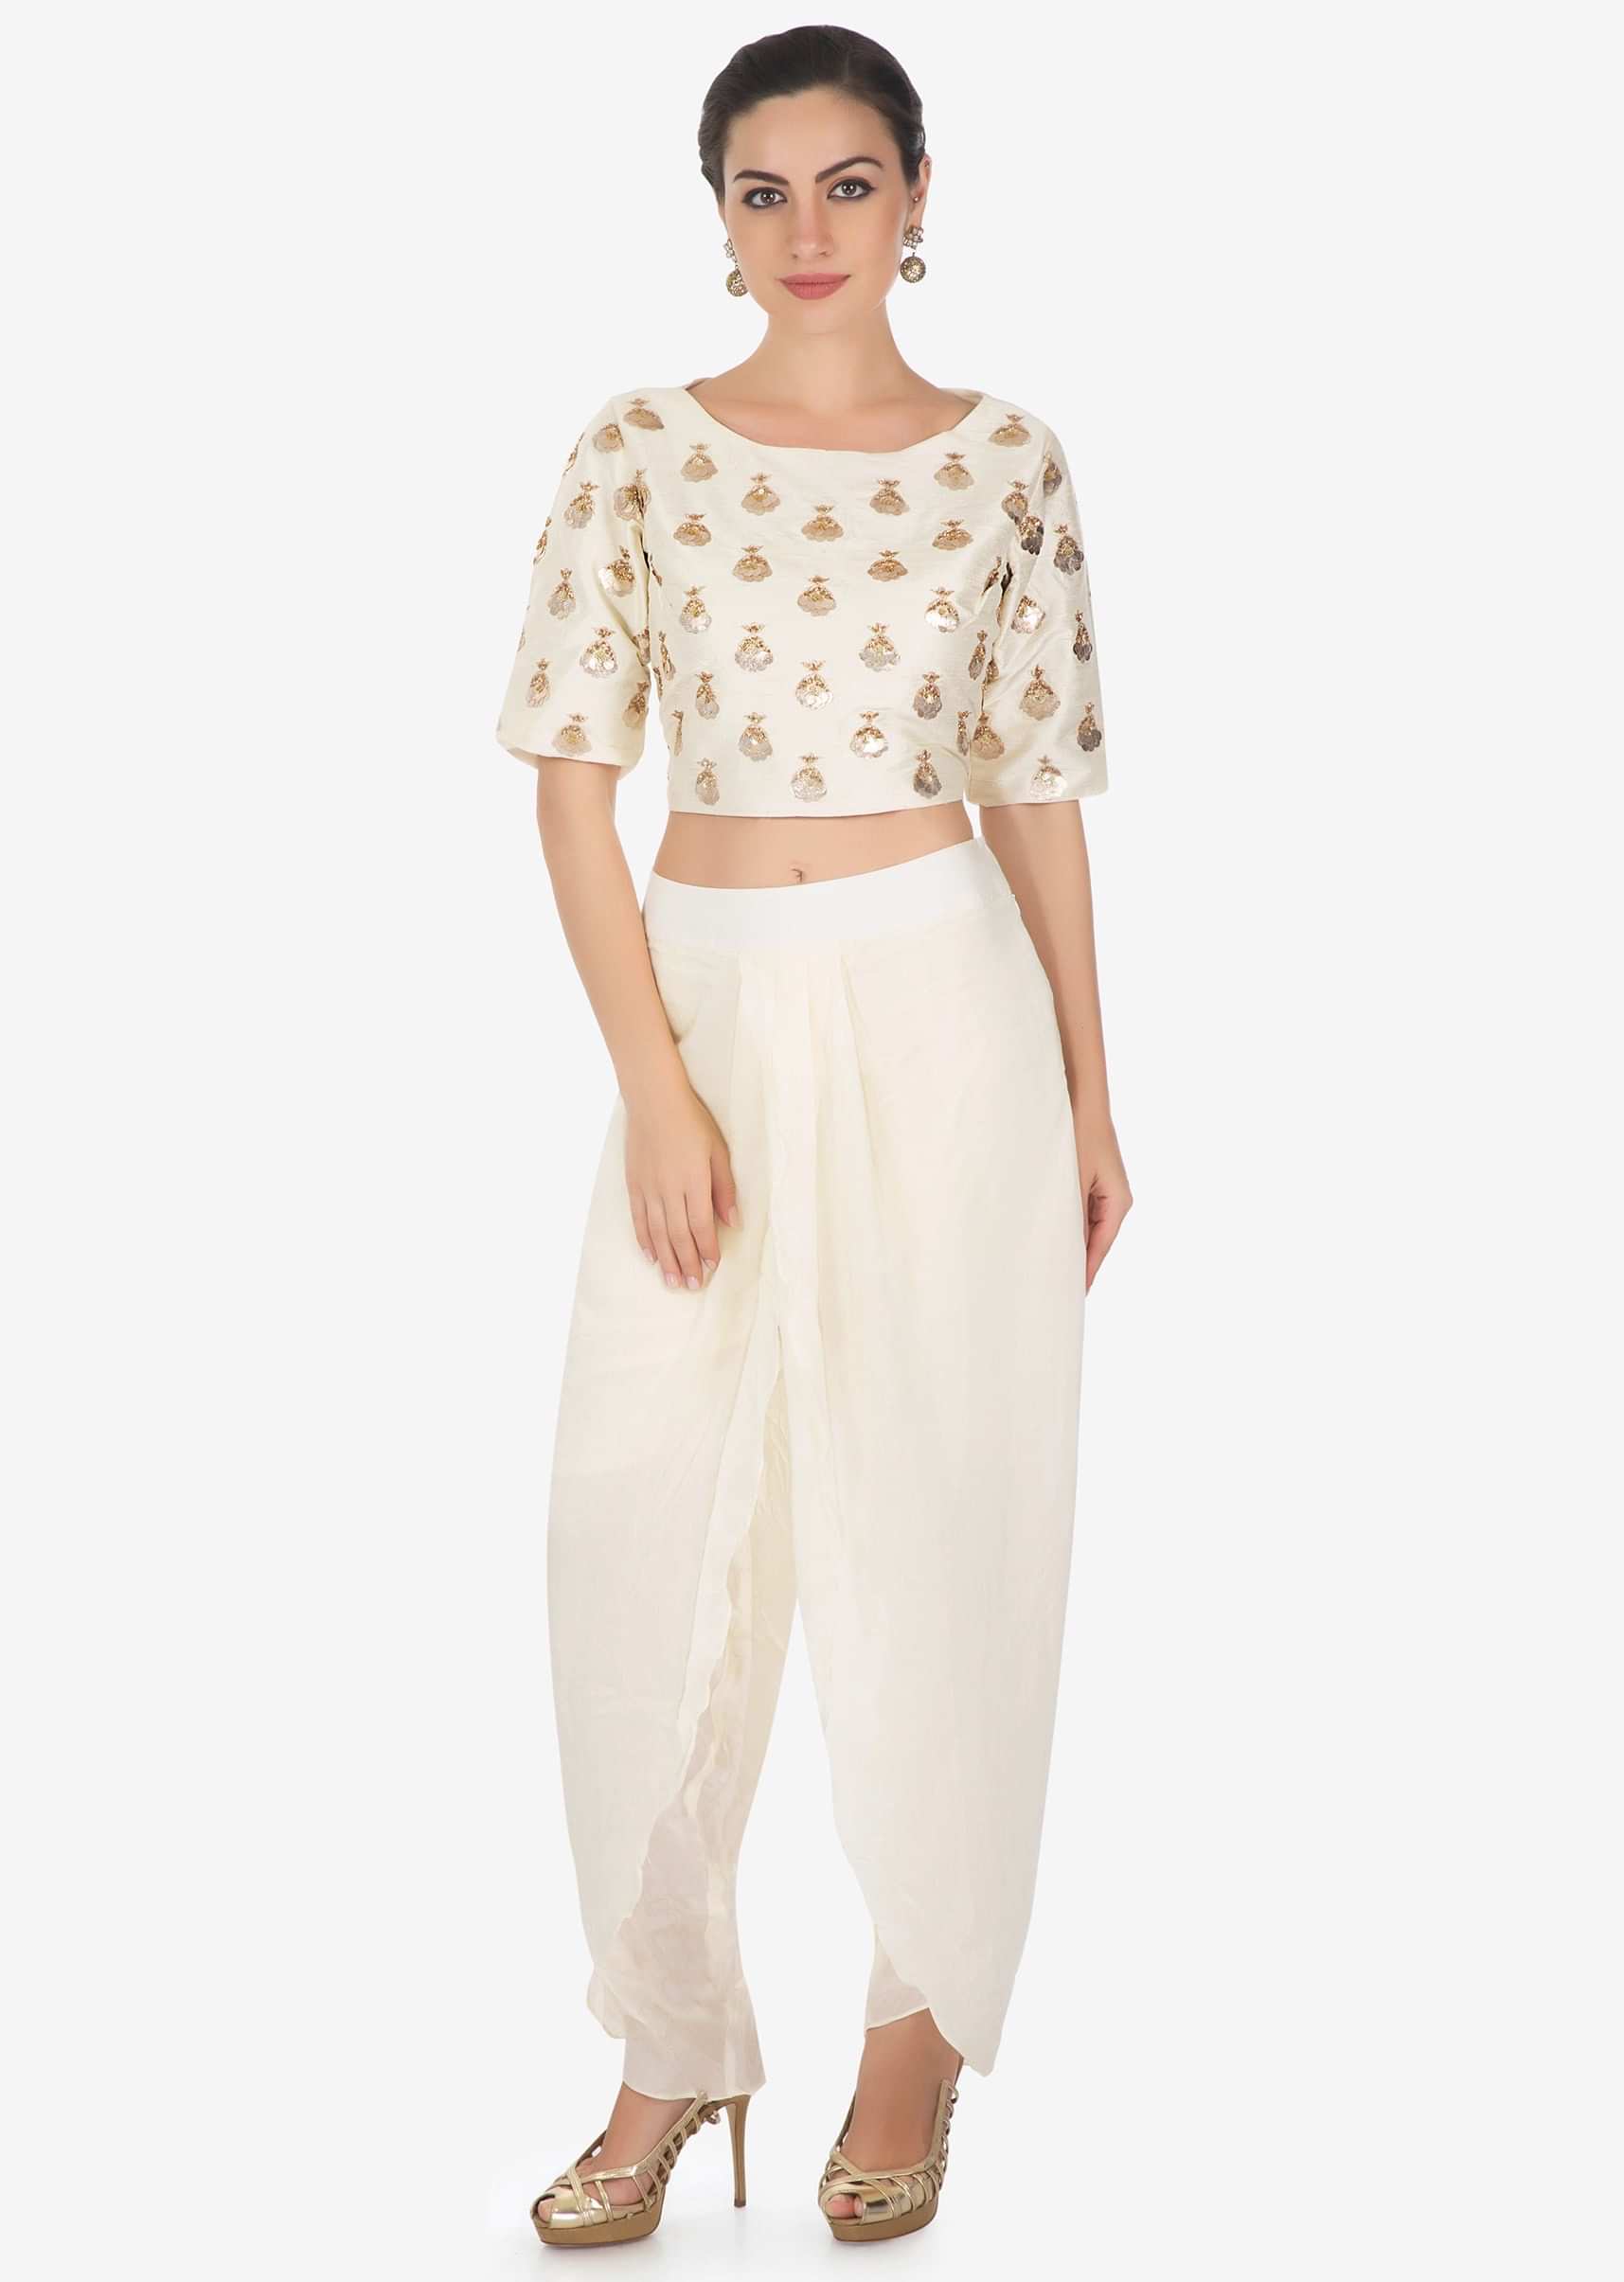 Cream dhoti pants matched with crop top blouse in gotta patch butti only on Kalki